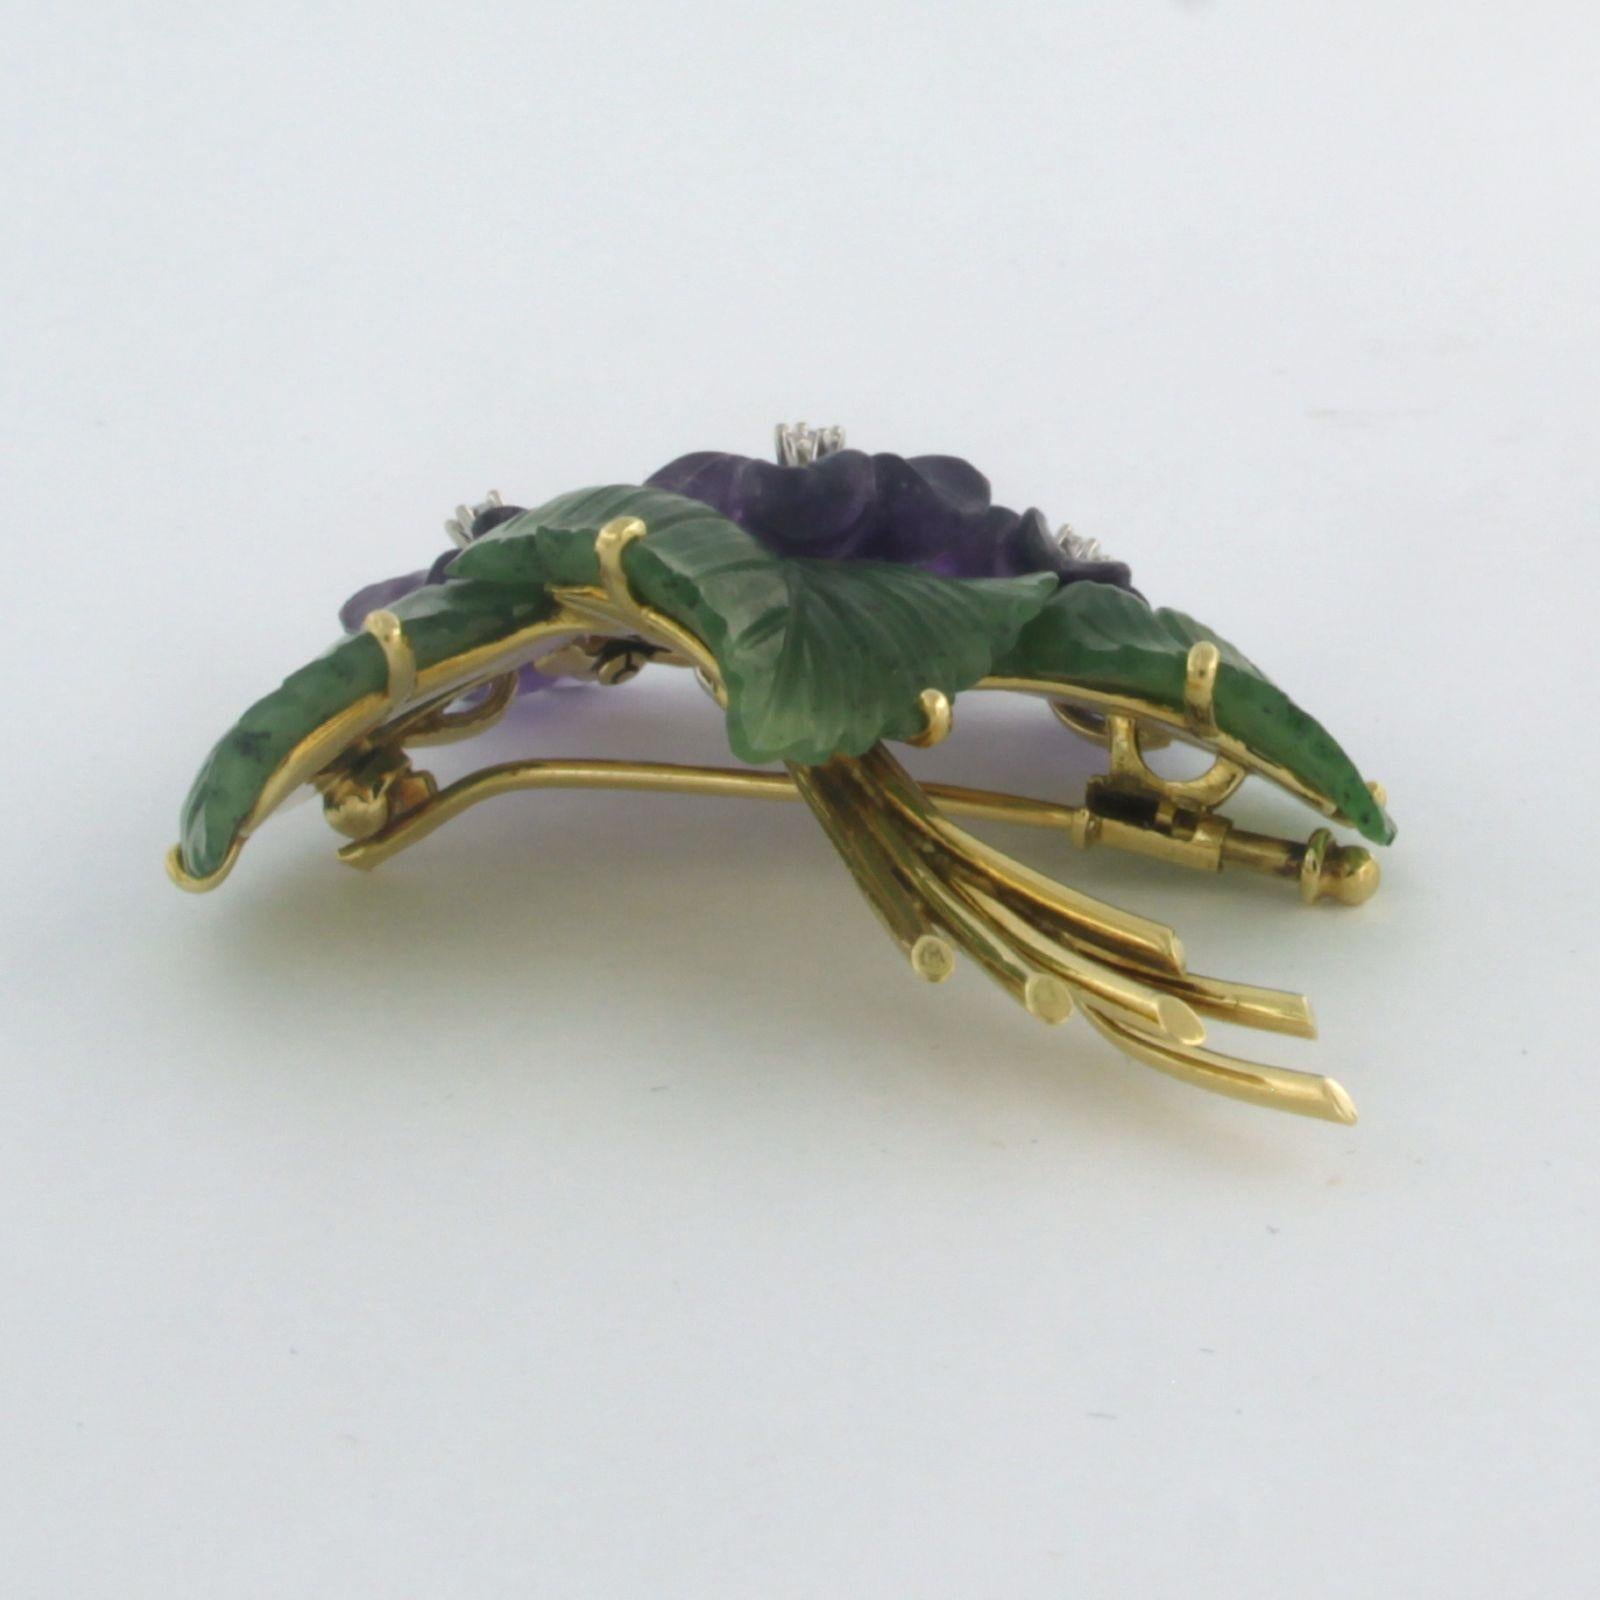 18k yellow gold brooch in the shape of a bouquet with amethyst, jade and single cut diamond. 0.08ct - F/G - VS/SI - dim. 6.2cm x 4.5cm

detailed description

the size of the brooch is 6.2 cm wide by 4.5 cm high and 1.3 cm deep

weight 21.5